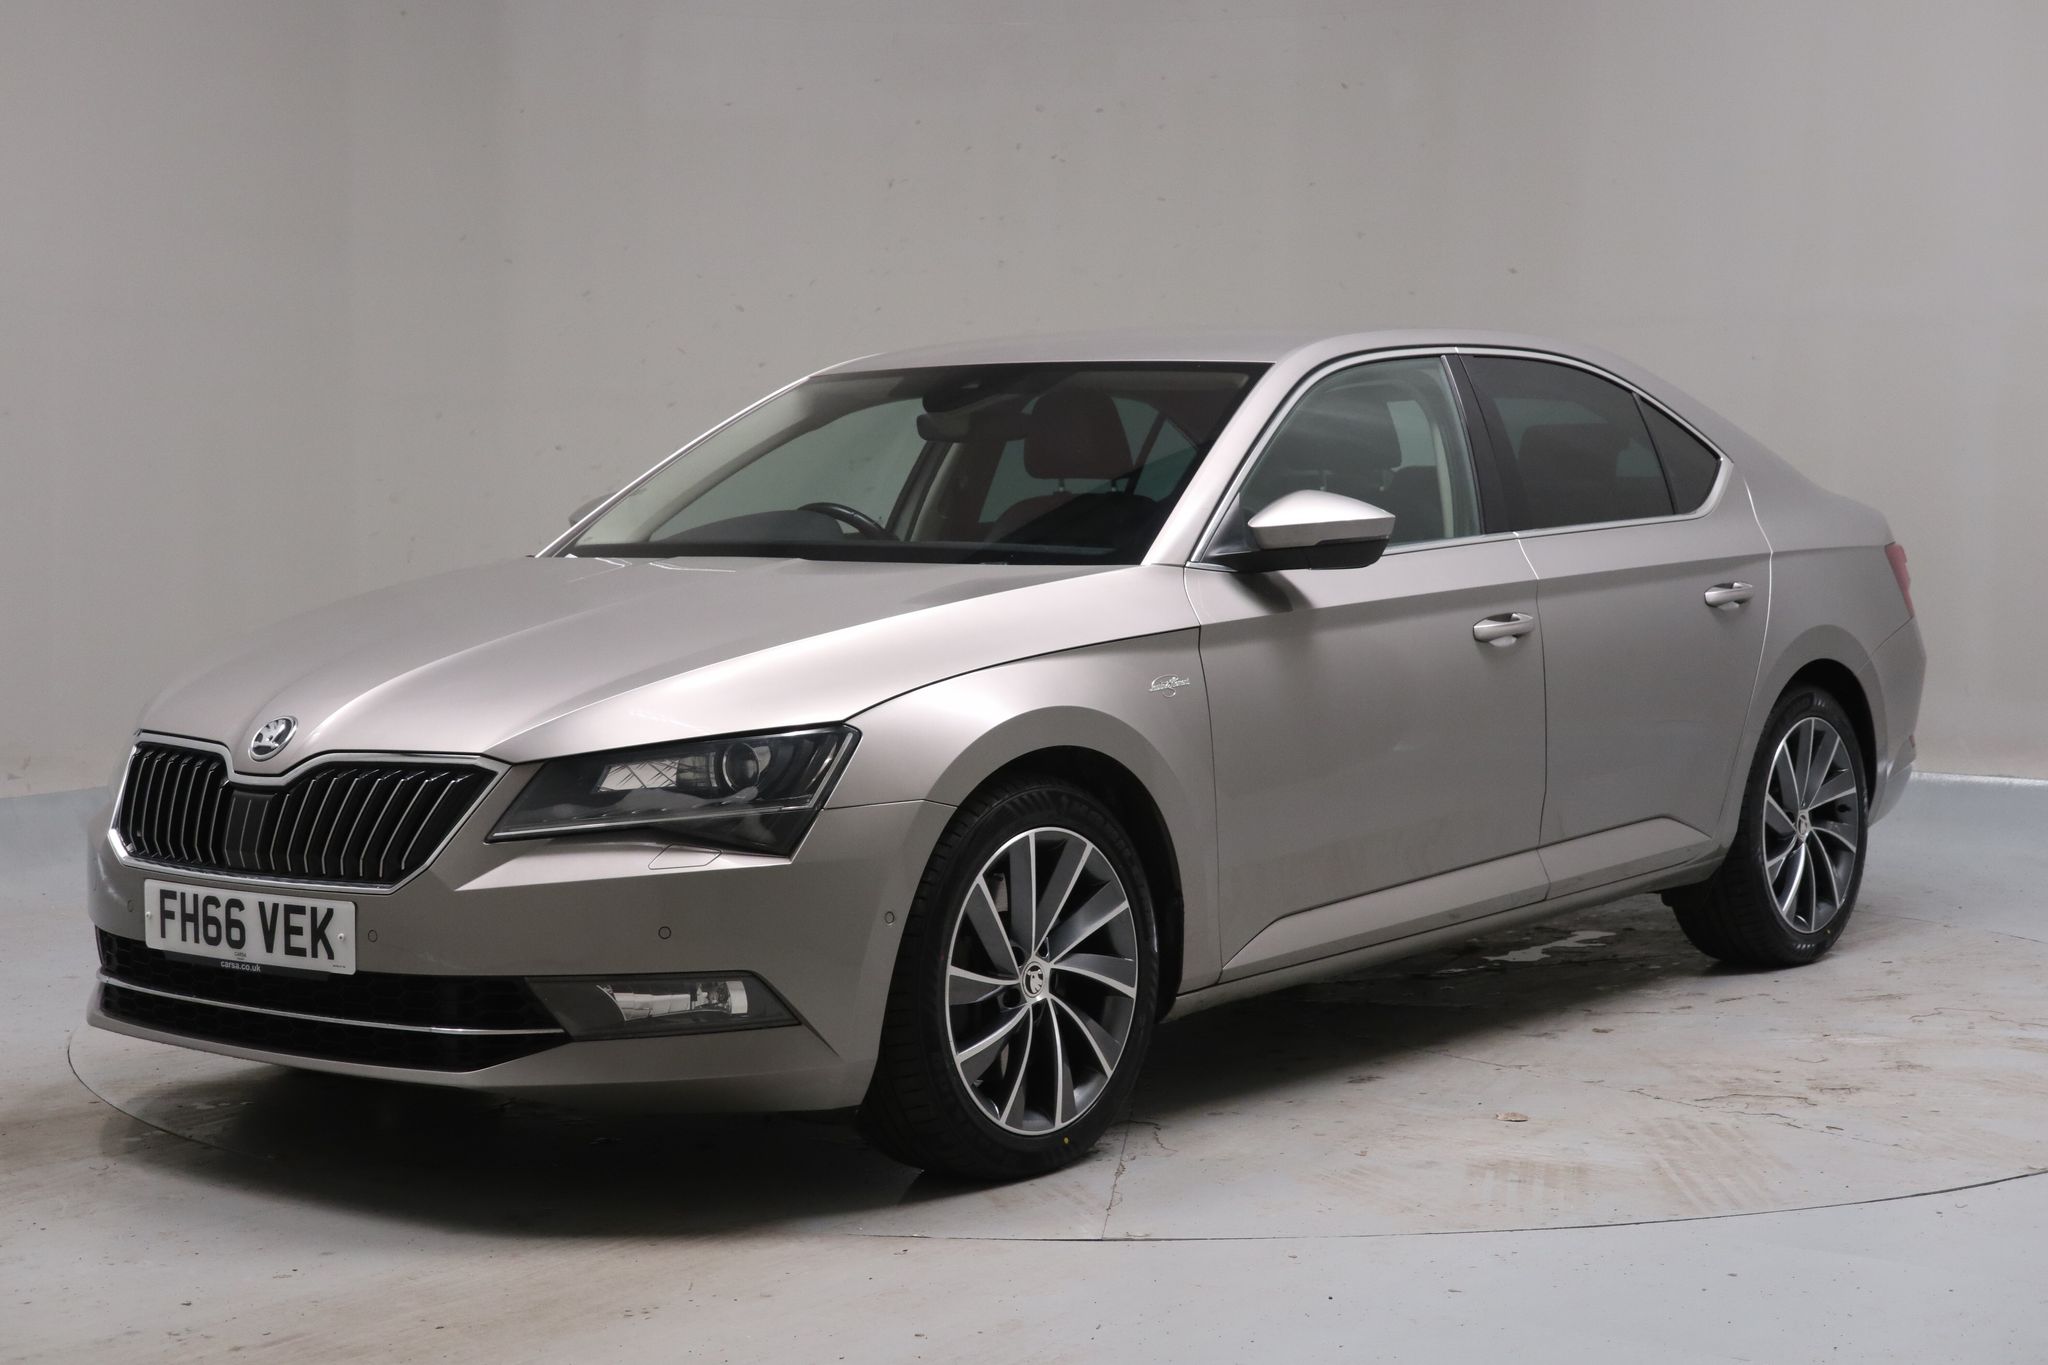 2017 used Skoda Superb 2.0 TSI Laurin & Klement DSG 4WD (280 ps)